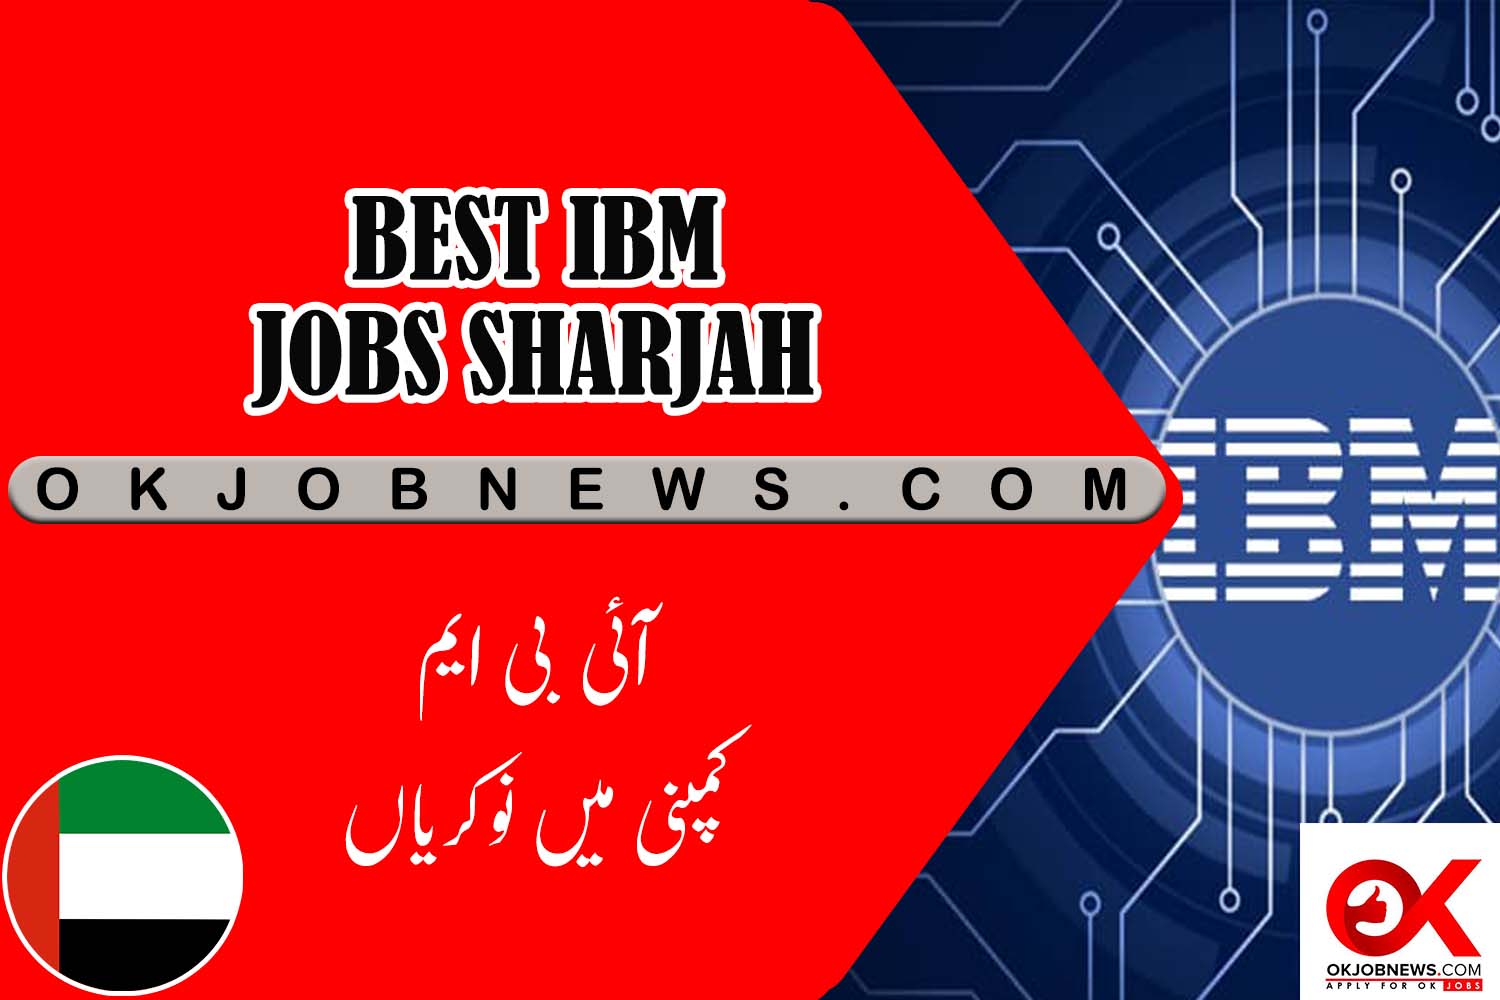 Discover the Best IBM Jobs in Sharjah